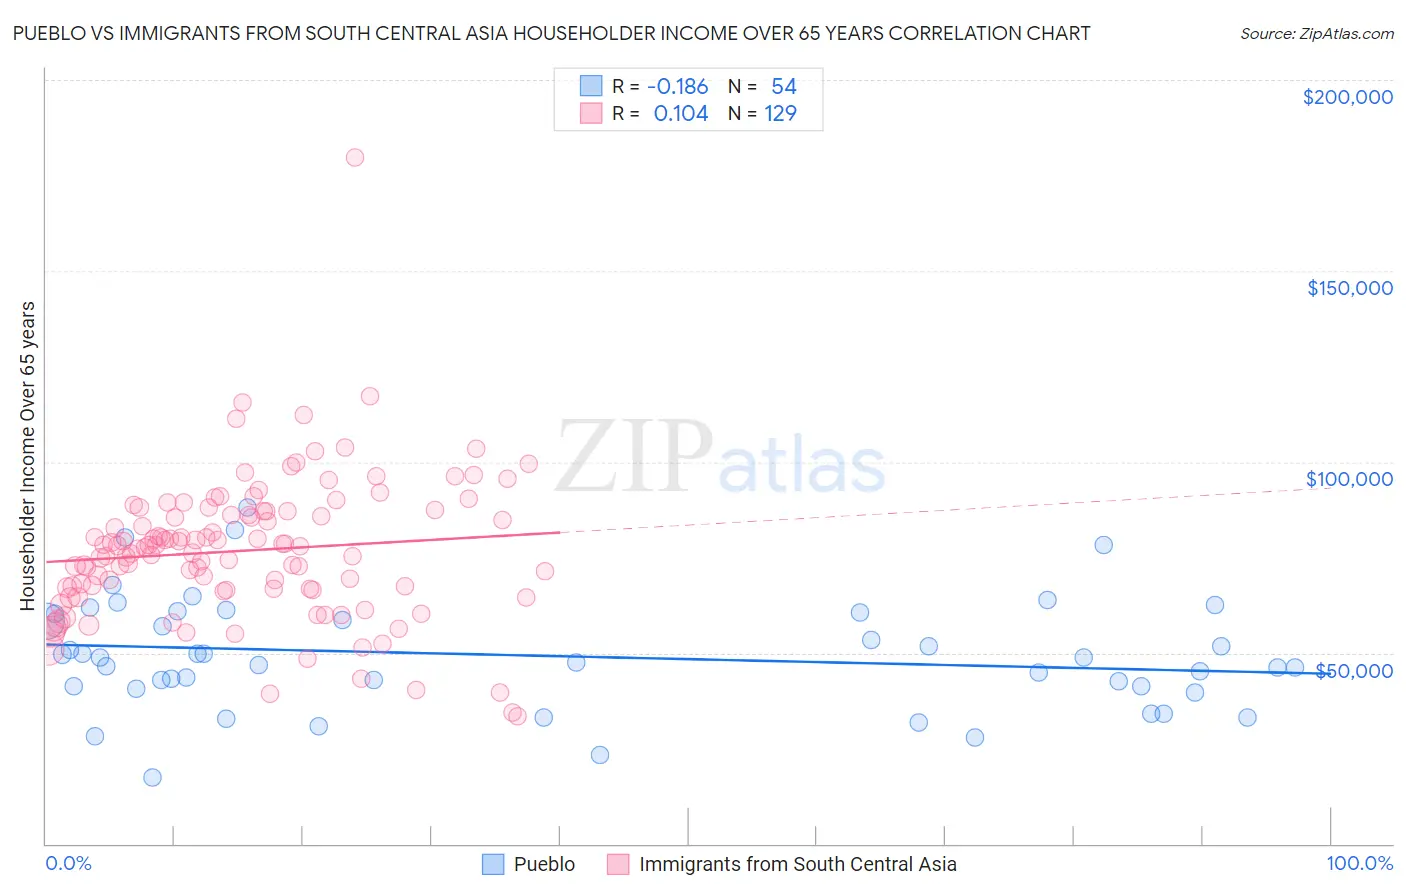 Pueblo vs Immigrants from South Central Asia Householder Income Over 65 years